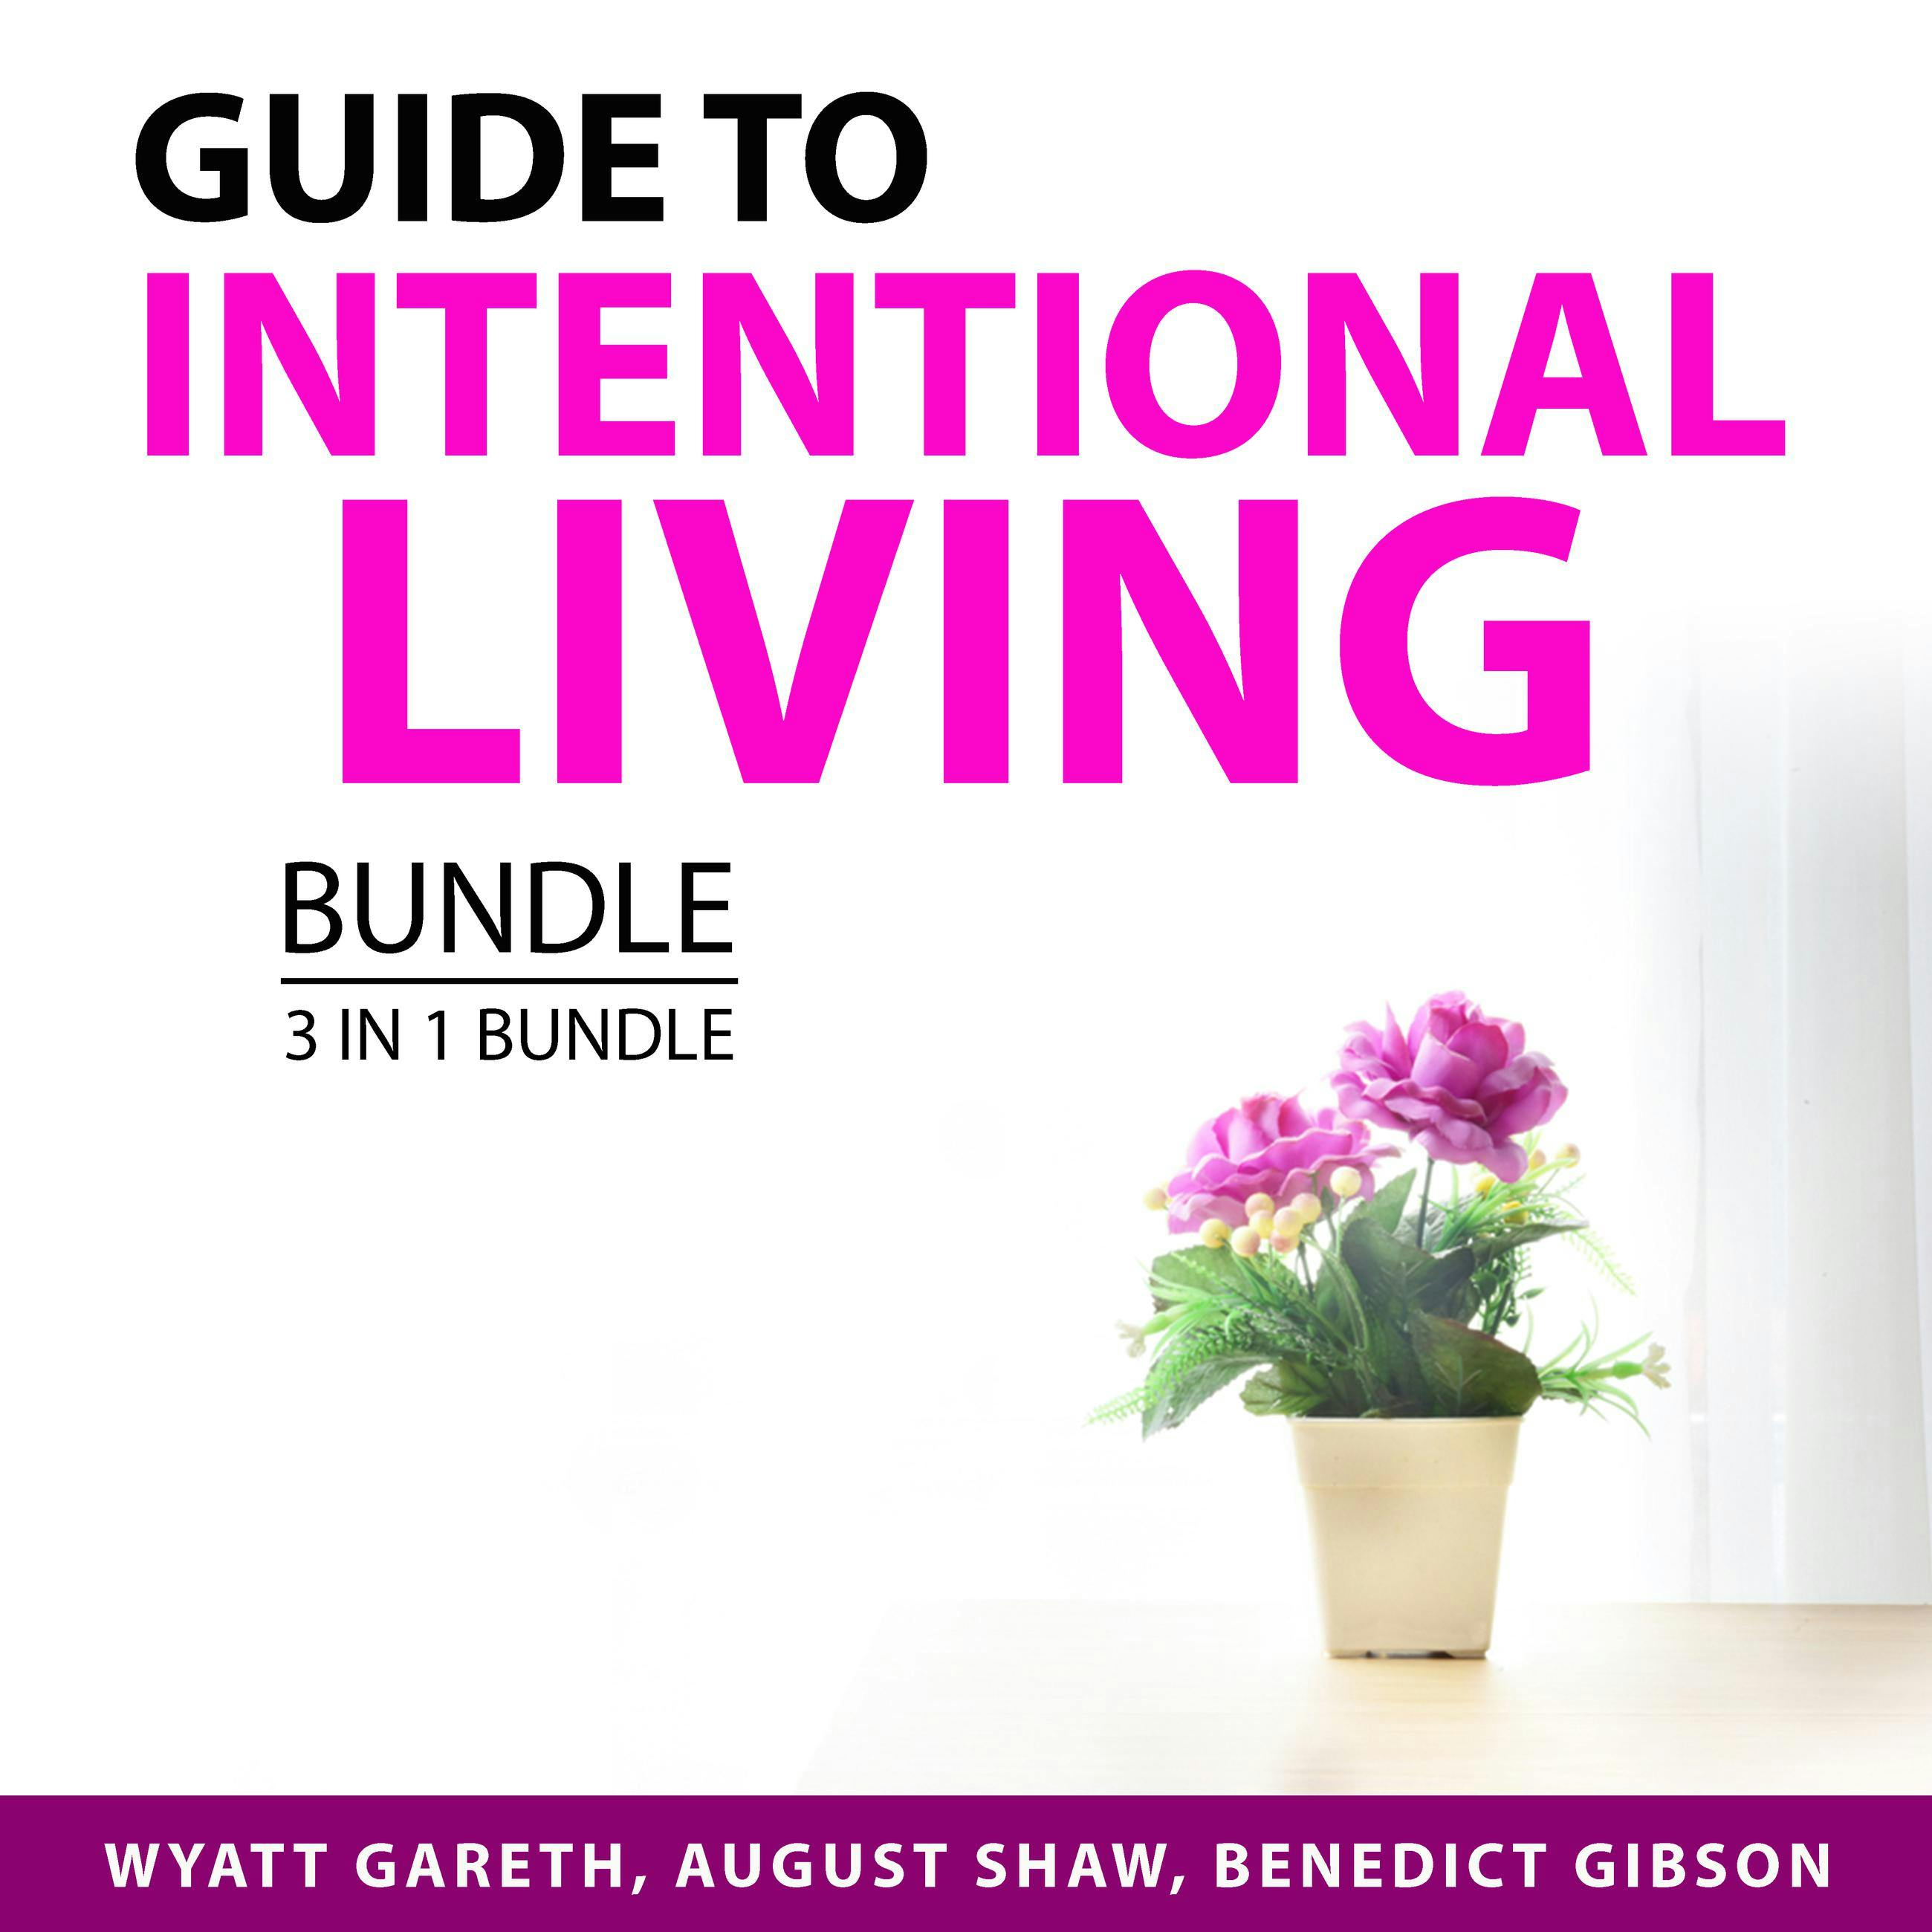 Guide to Intentional Living Bundle, 3 in 1 Bundle: Purposeful Life, Live in the Present Moment, and Living On Purpose - undefined